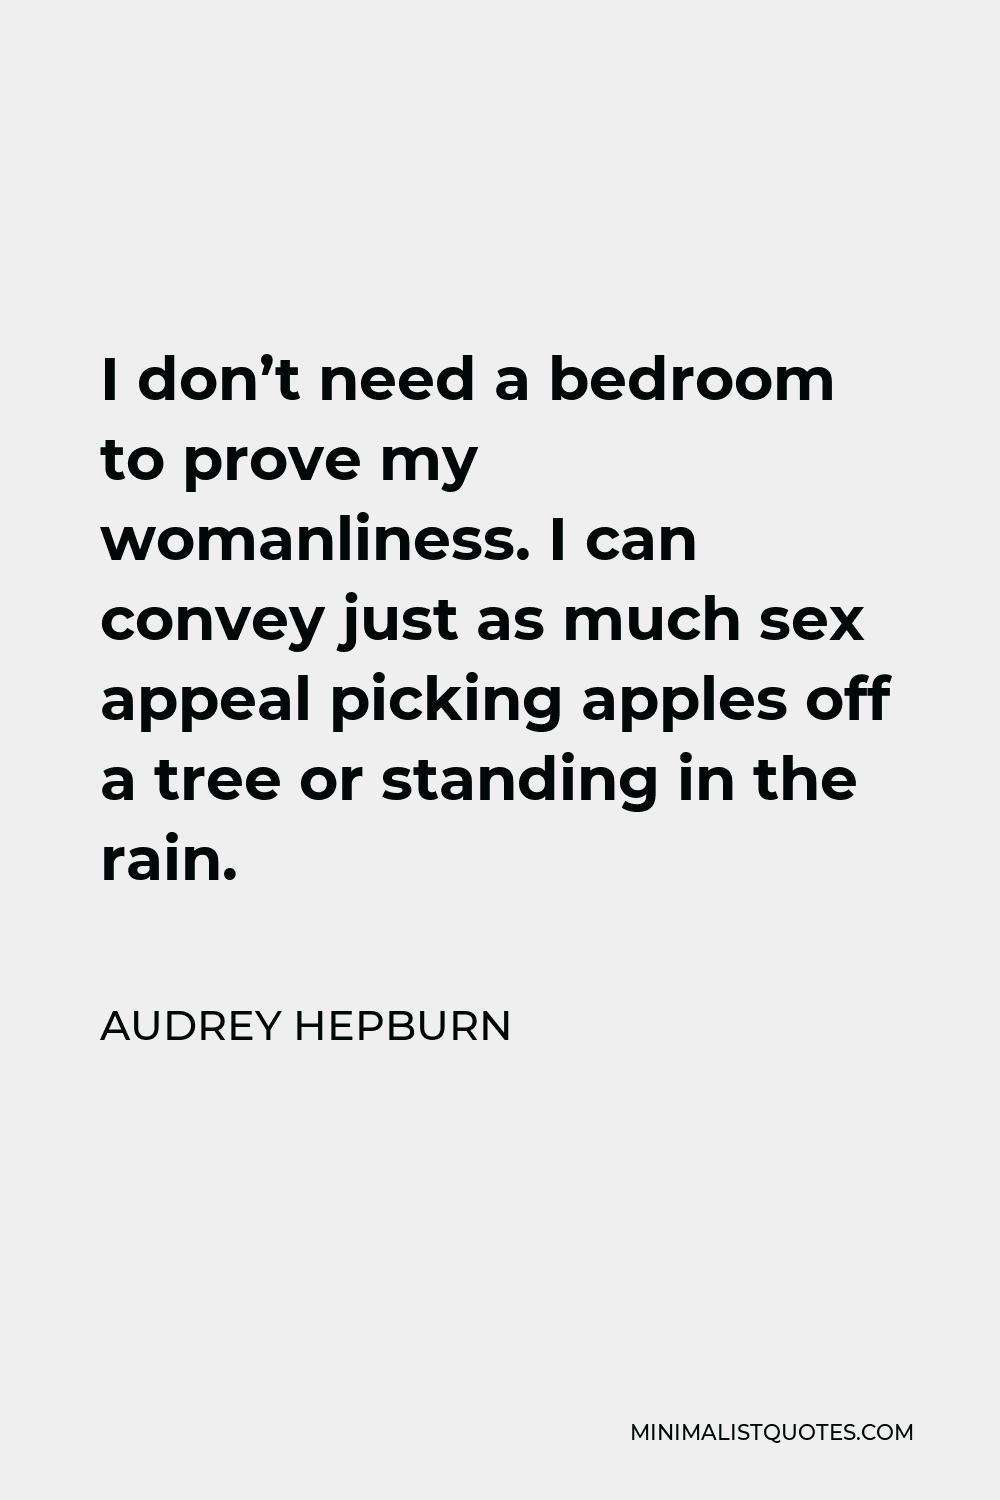 Audrey Hepburn Quote - I don’t need a bedroom to prove my womanliness. I can convey just as much sex appeal picking apples off a tree or standing in the rain.